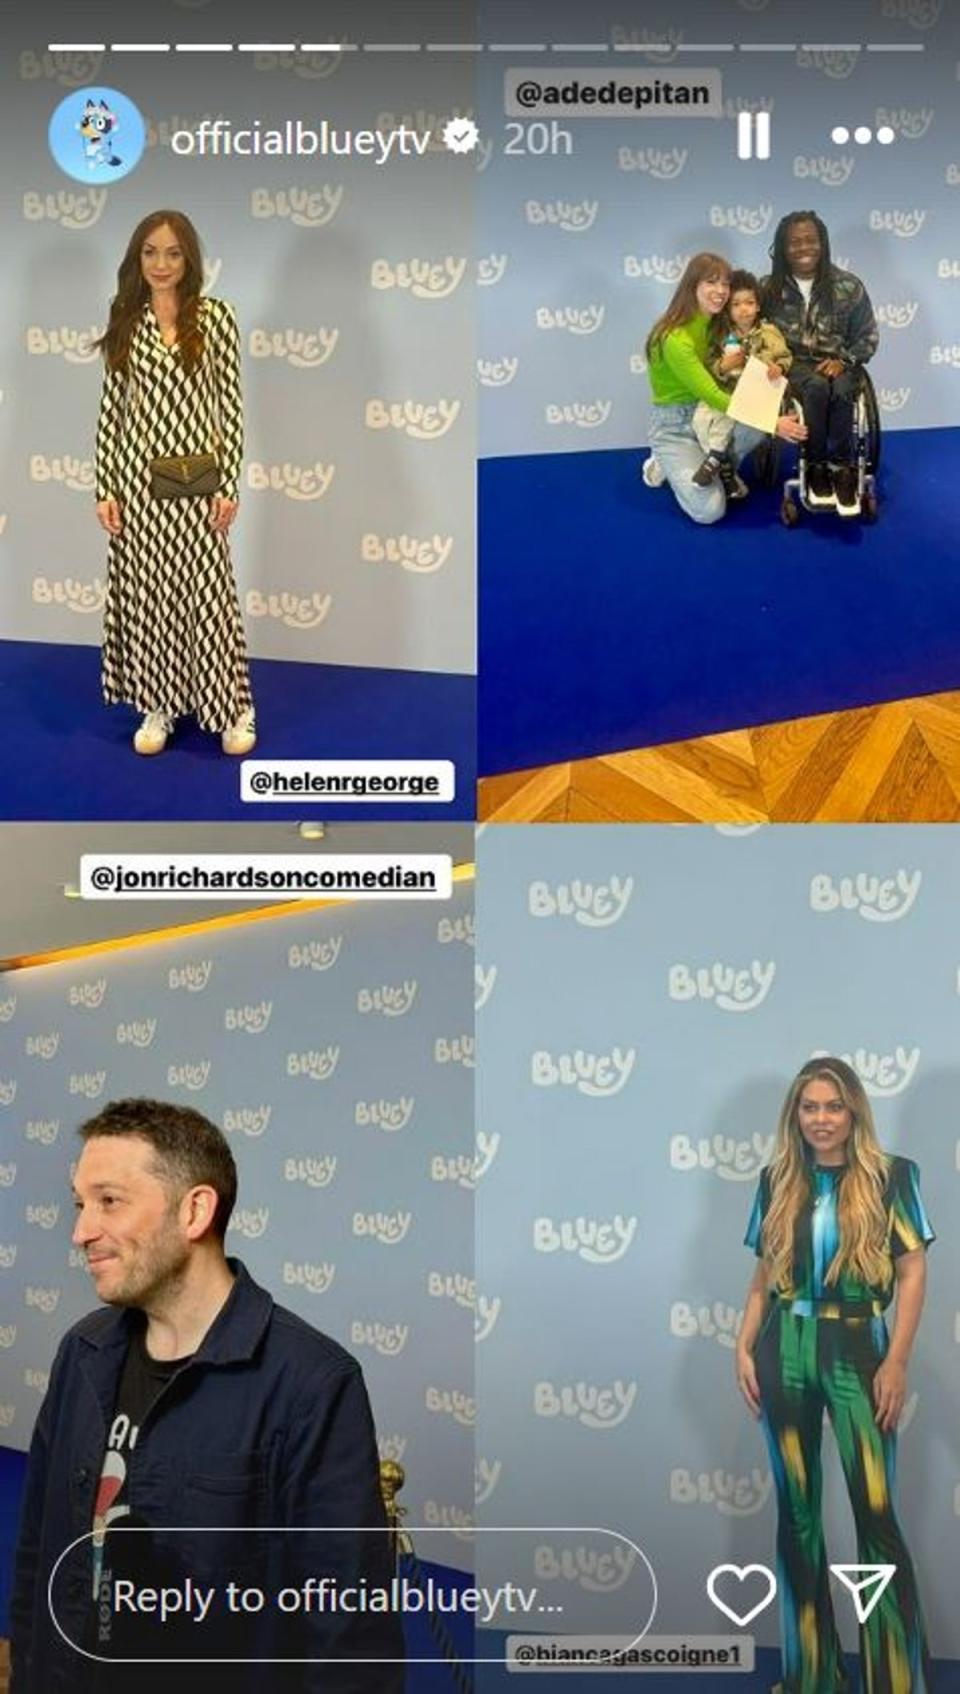 L-R Helen George, Ade Adepitan, Jon Richardson and Bianca Gascoigne attended the special screening of Bluey The Sign in London (Instagram @officialblueytv)